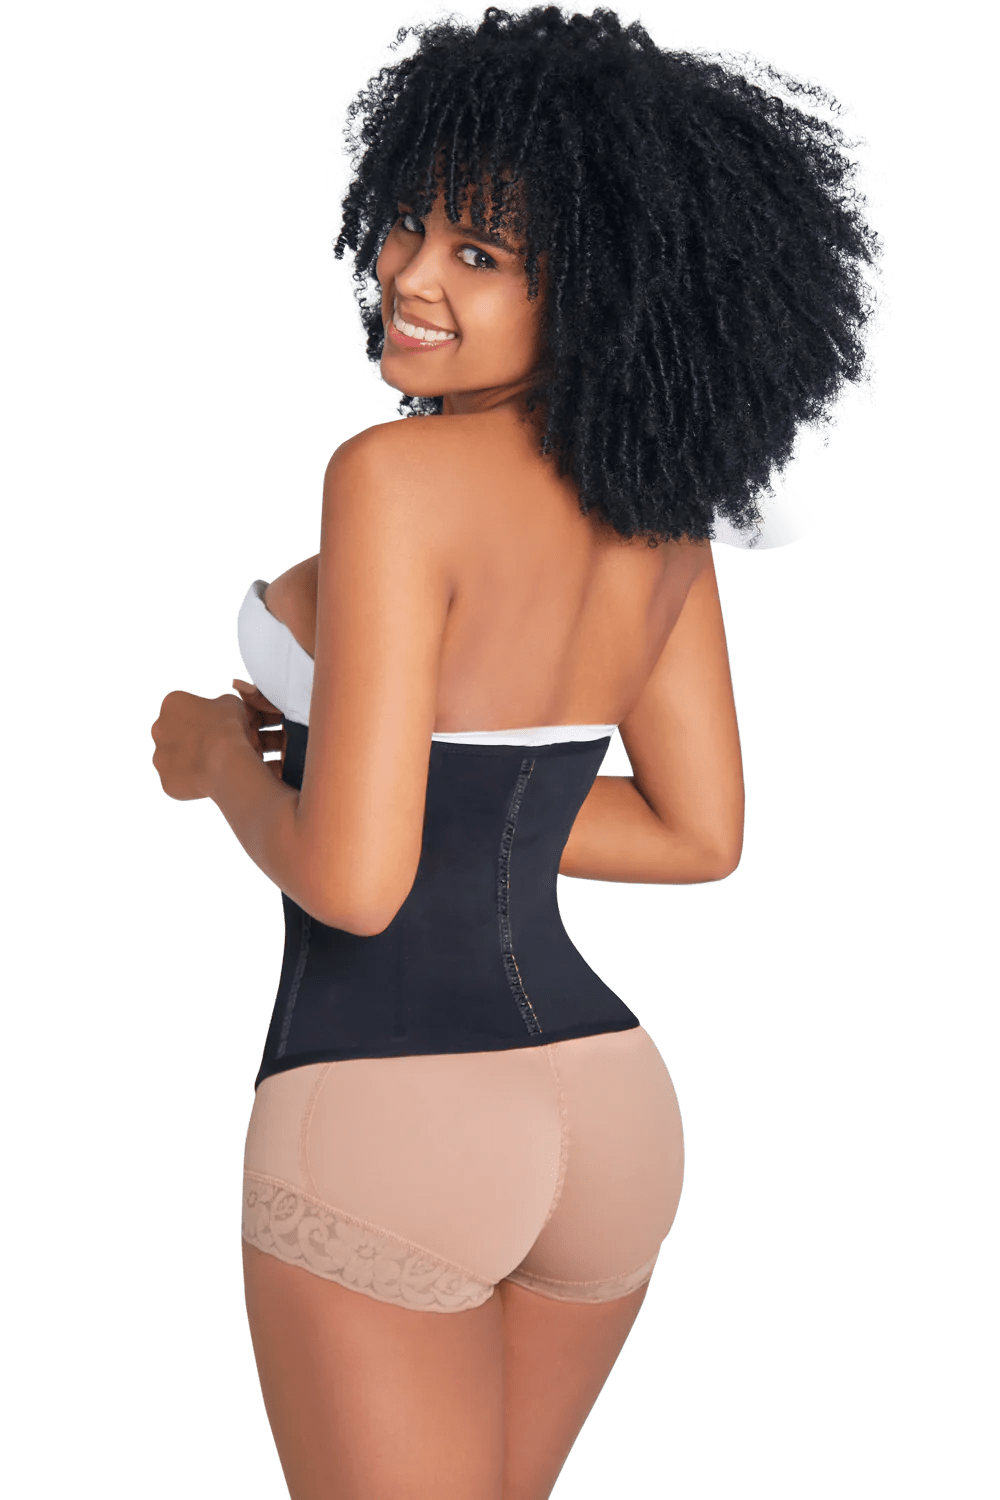 Ily Clothing Shapwear Colombian Latex Waist Trainer